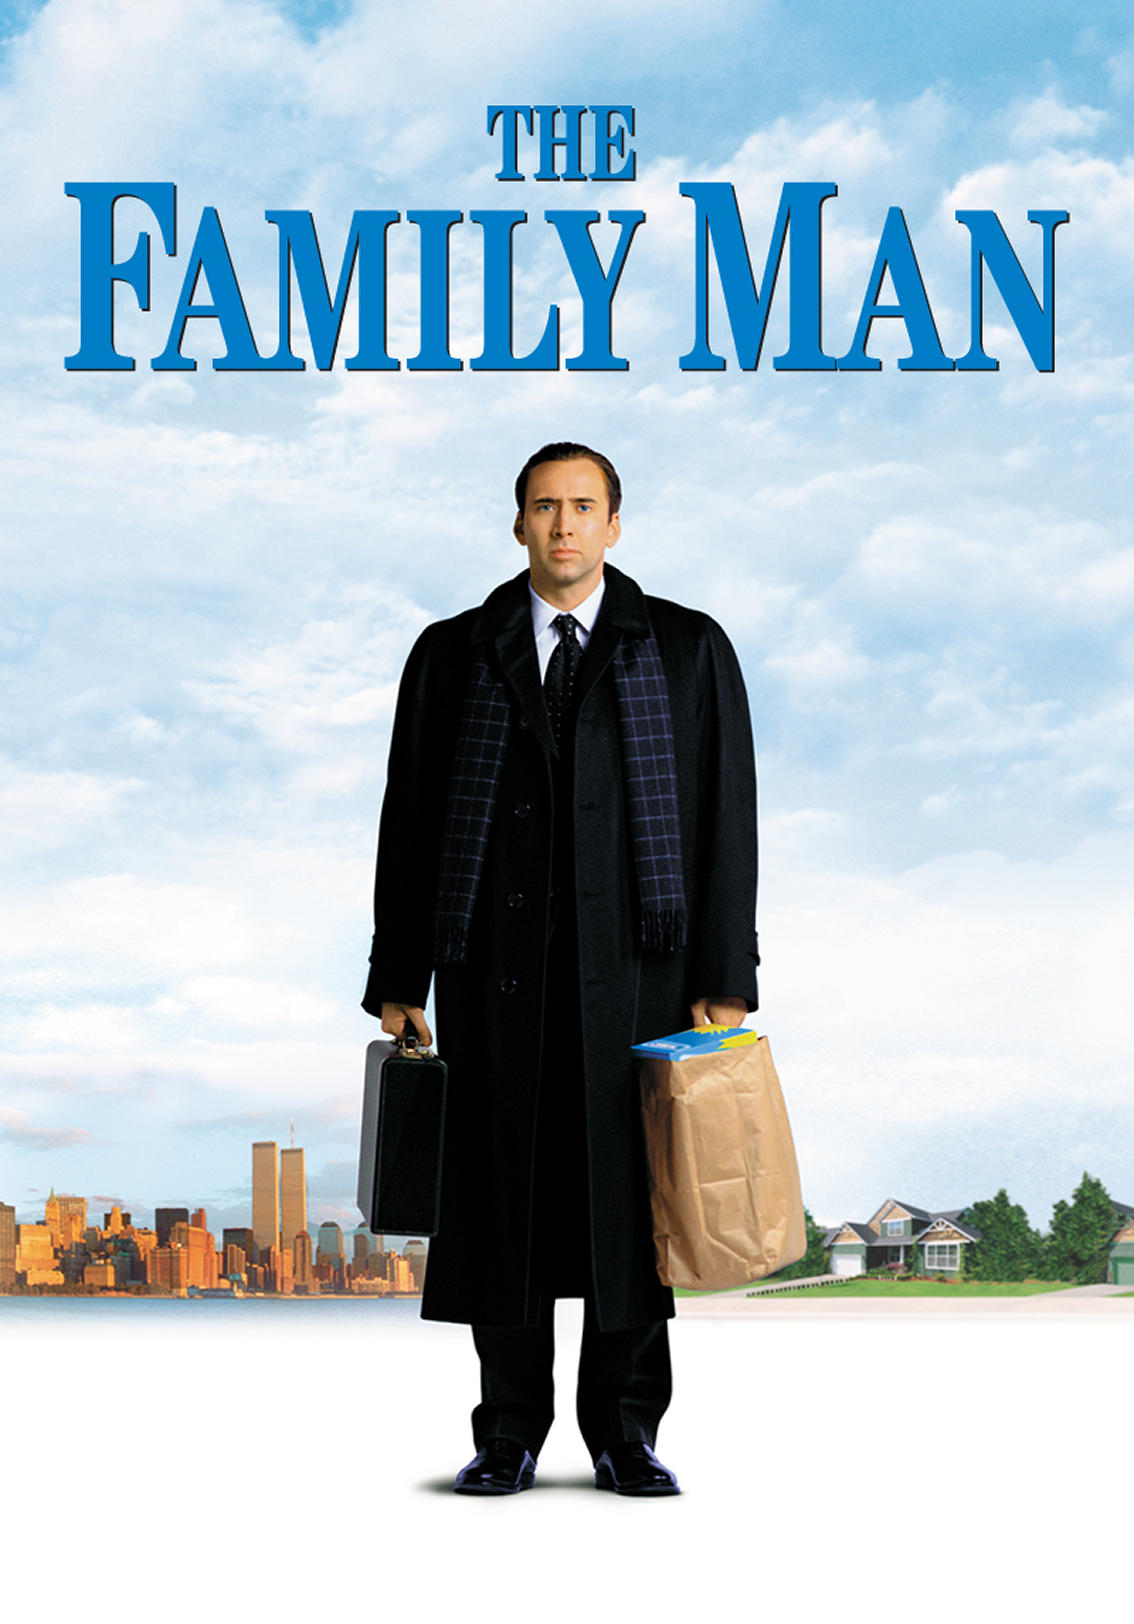 Family Man download the new version for apple